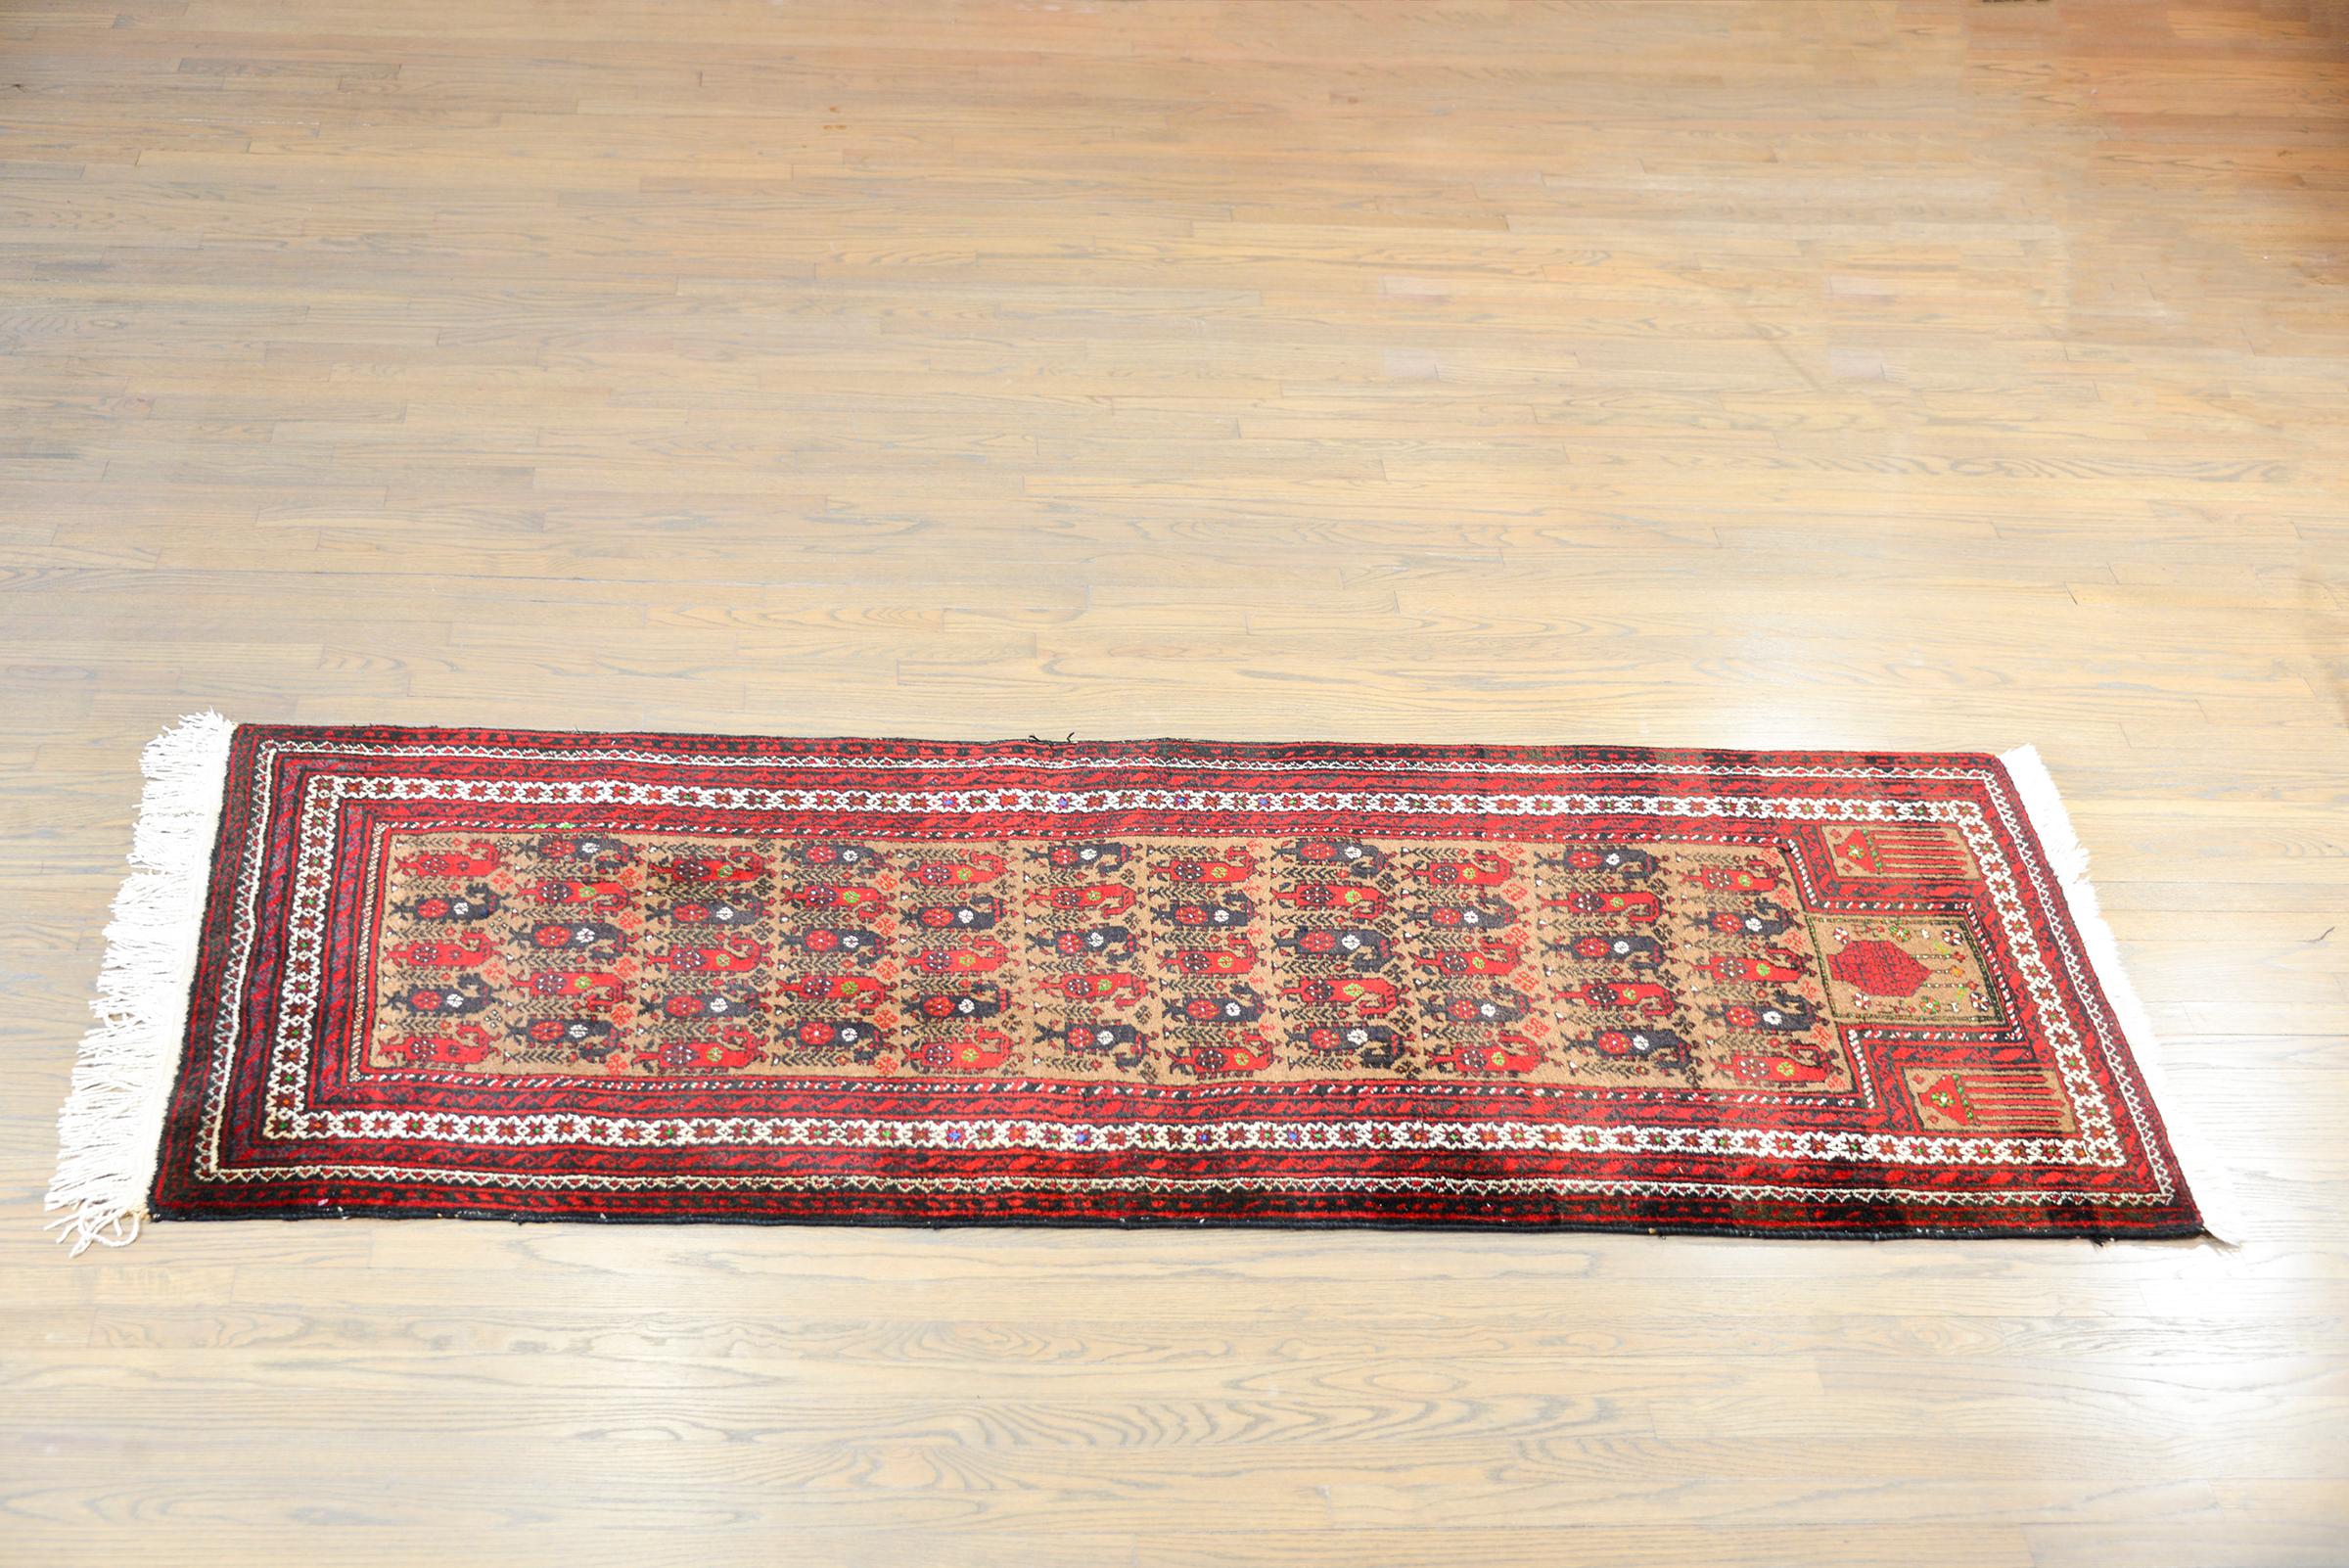 A wonderful vintage Afghani Baluch prayer rug with an all-over paisley pattern woven in crimson and brown wool set against a natural camel hairs background, and surrounded by a complementary petite geometric patterned border.